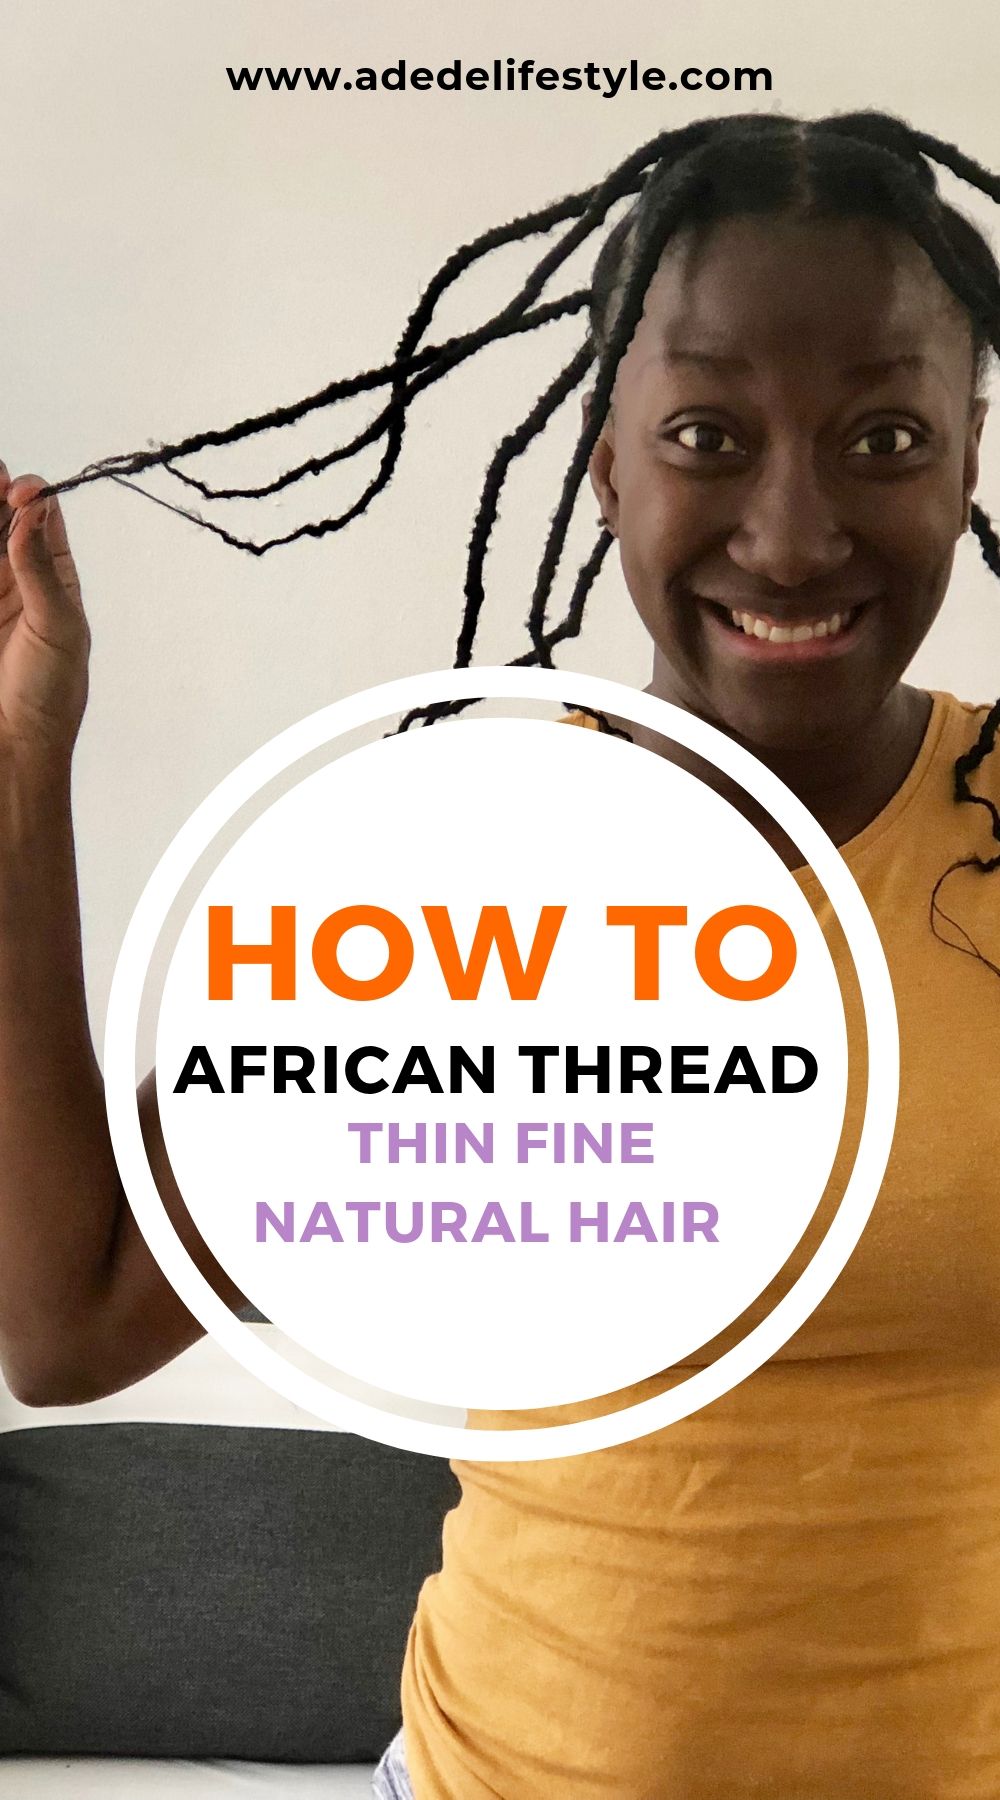 African threading on thin fine natural hair